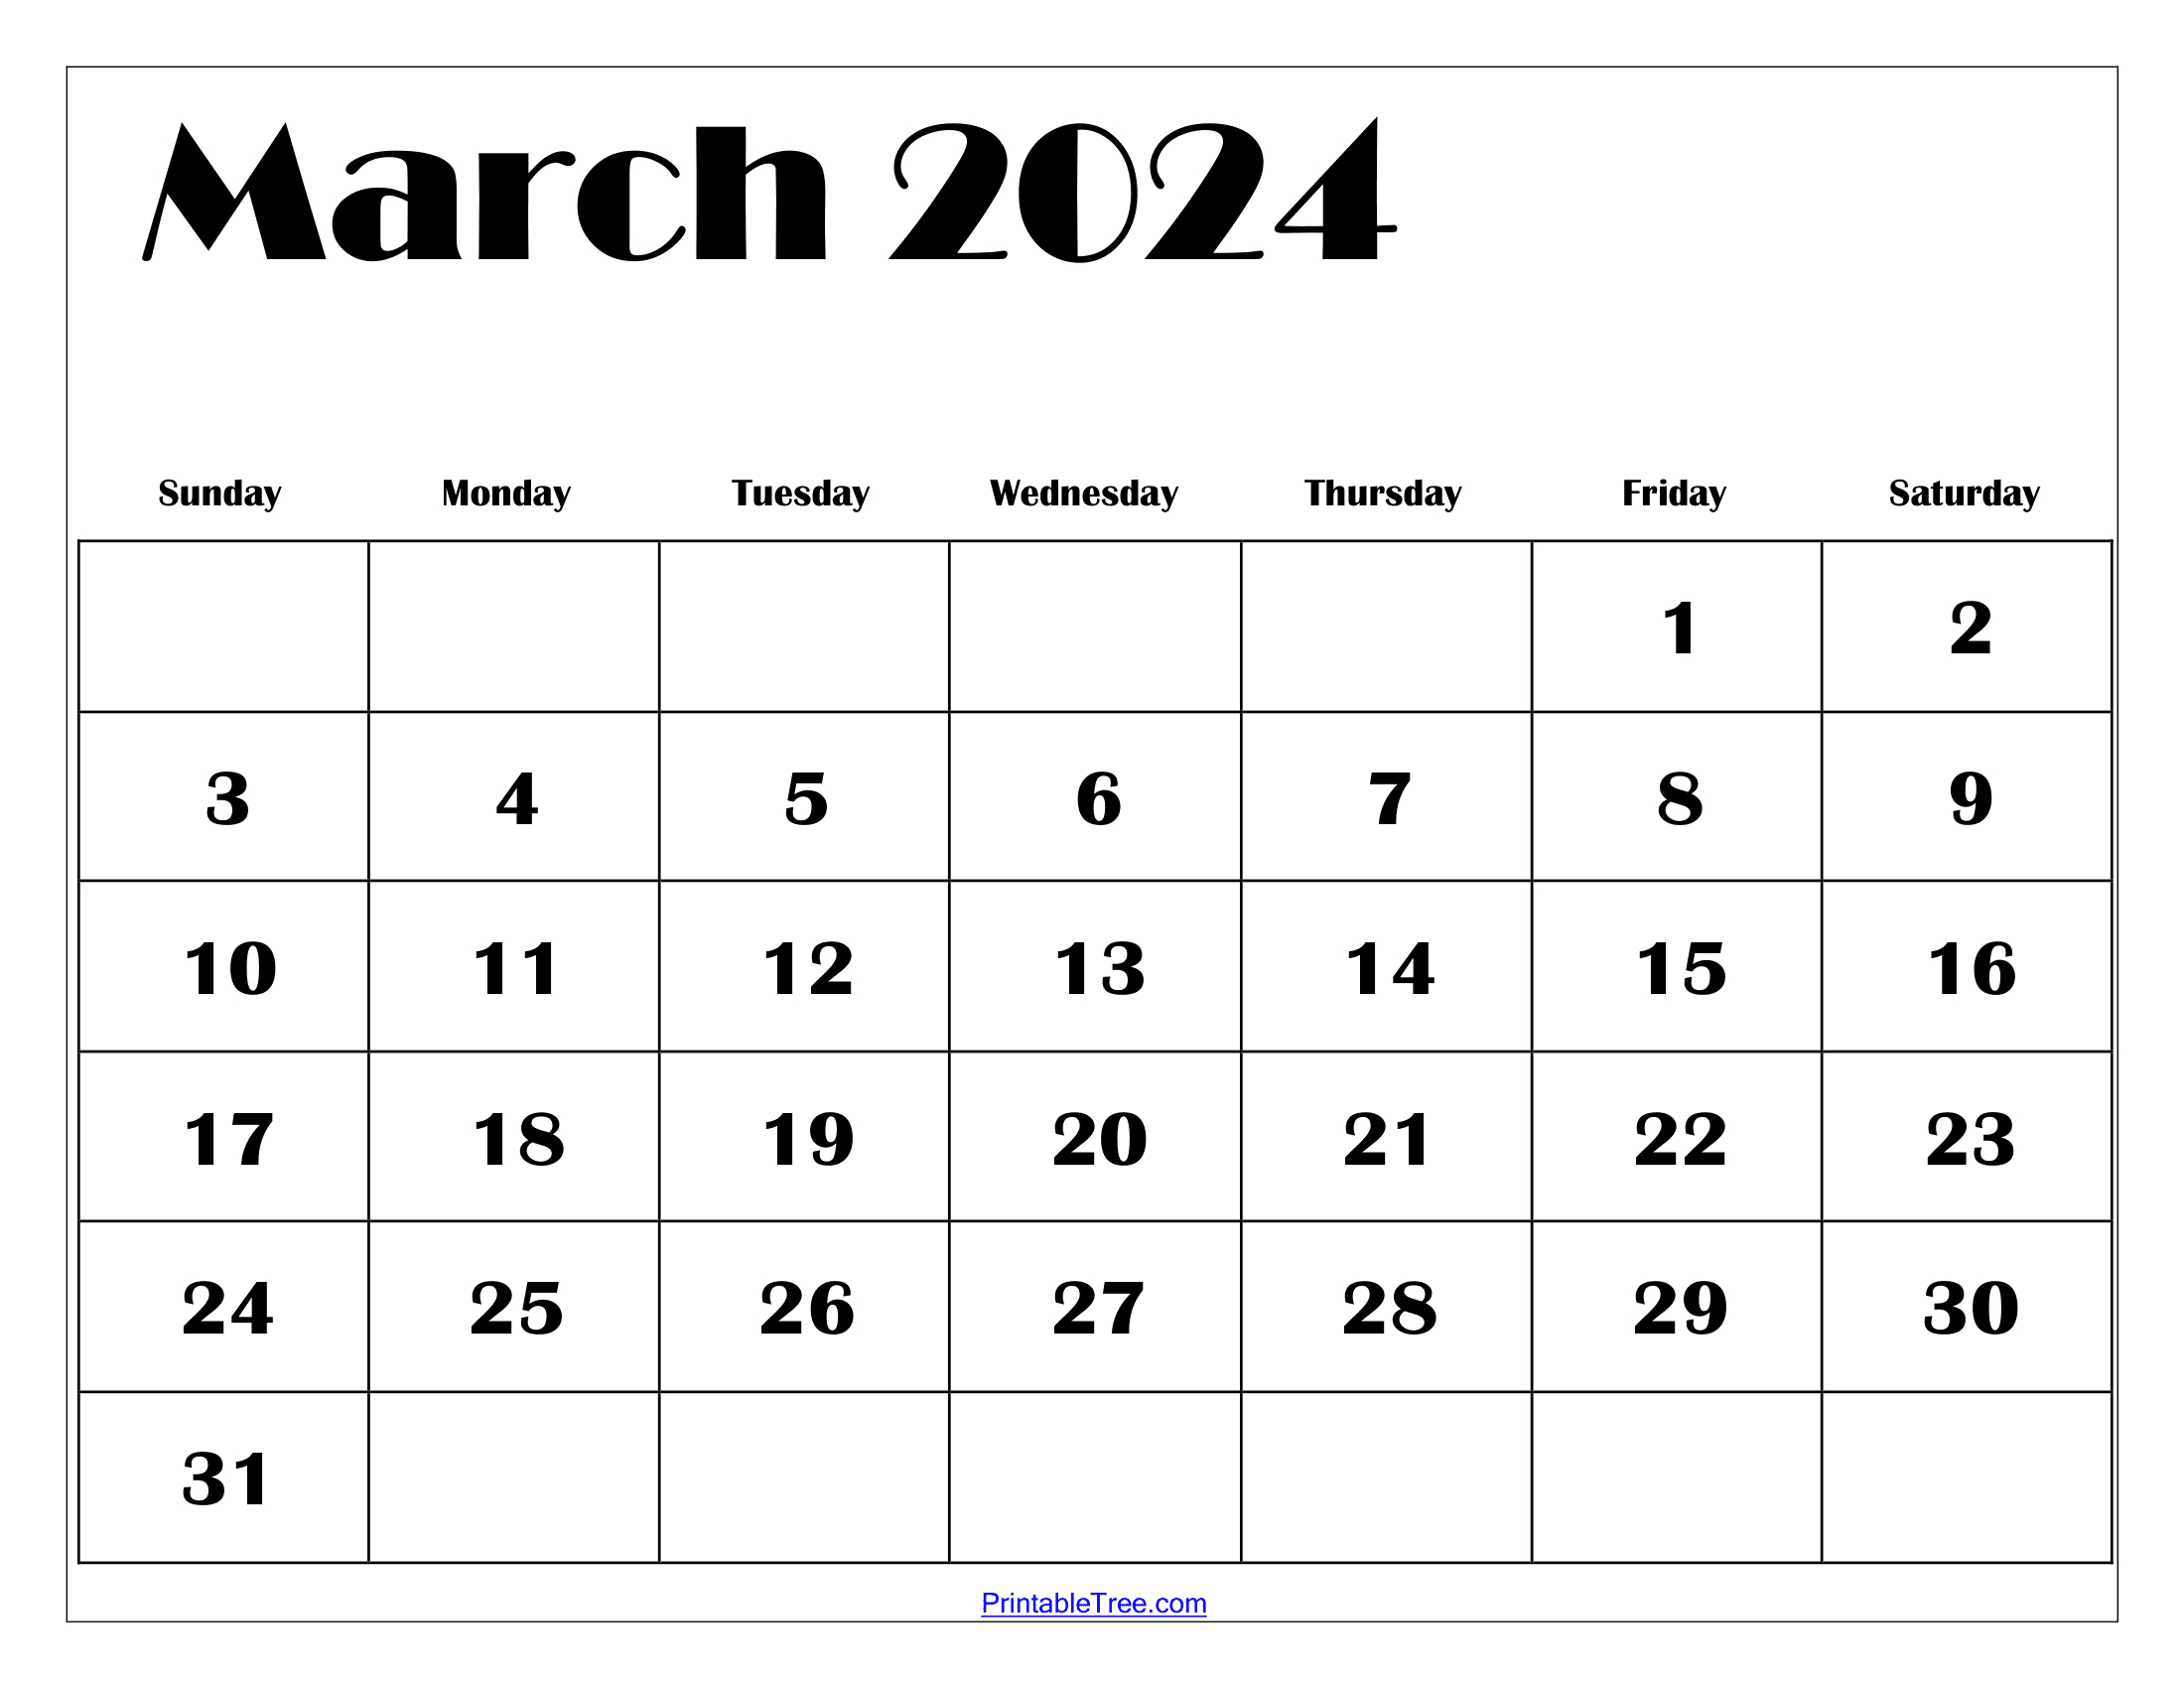 March 2024 Calendar Printable Pdf With Holidays Template Free | March Printable Calendar 2024